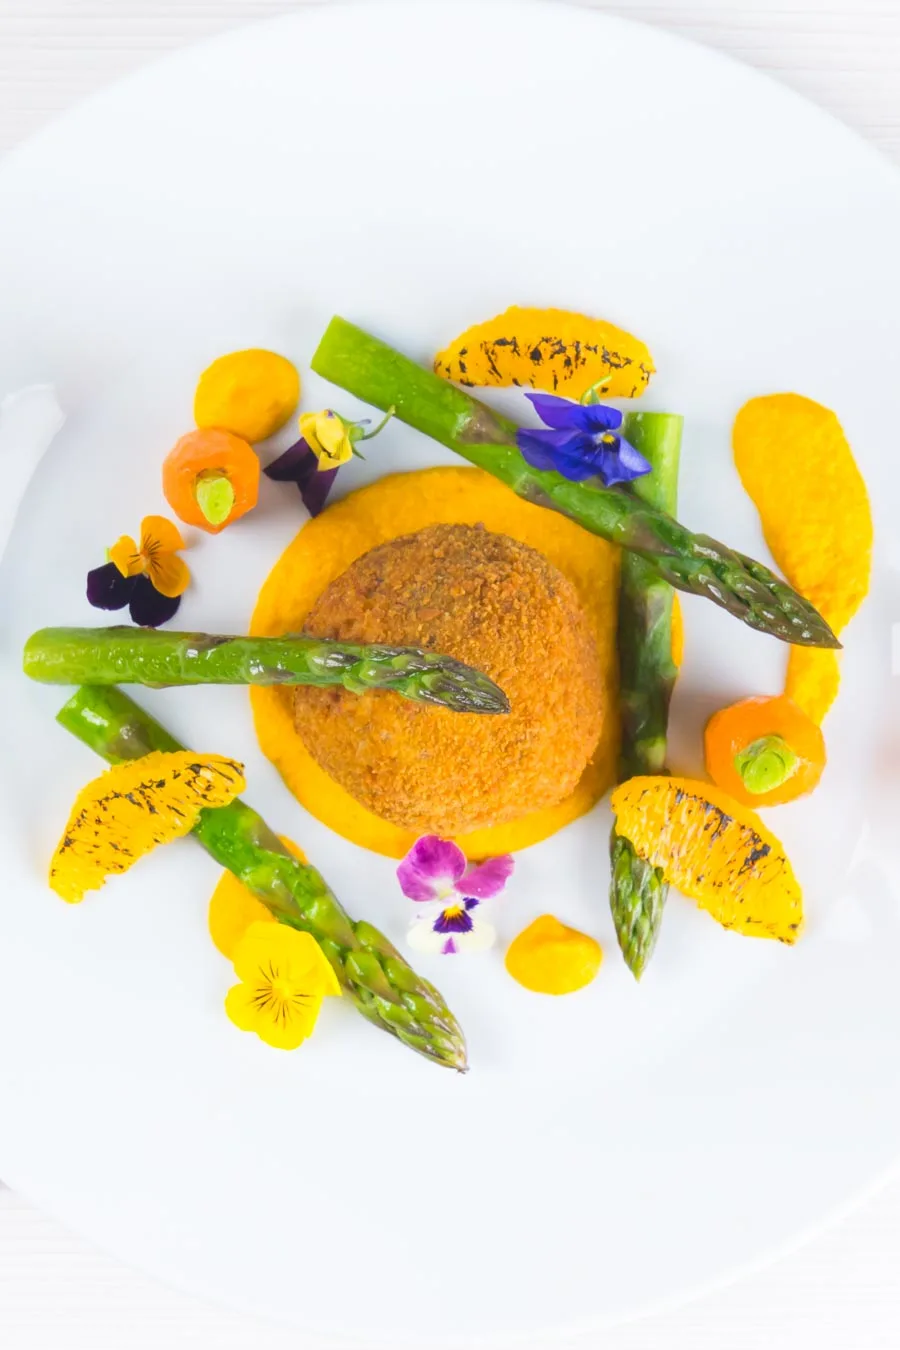 These confit duck leg bonbons are at the centre of a surprisingly light and wonderfully fancy meal featuring an orange and cumin puree and asparagus.